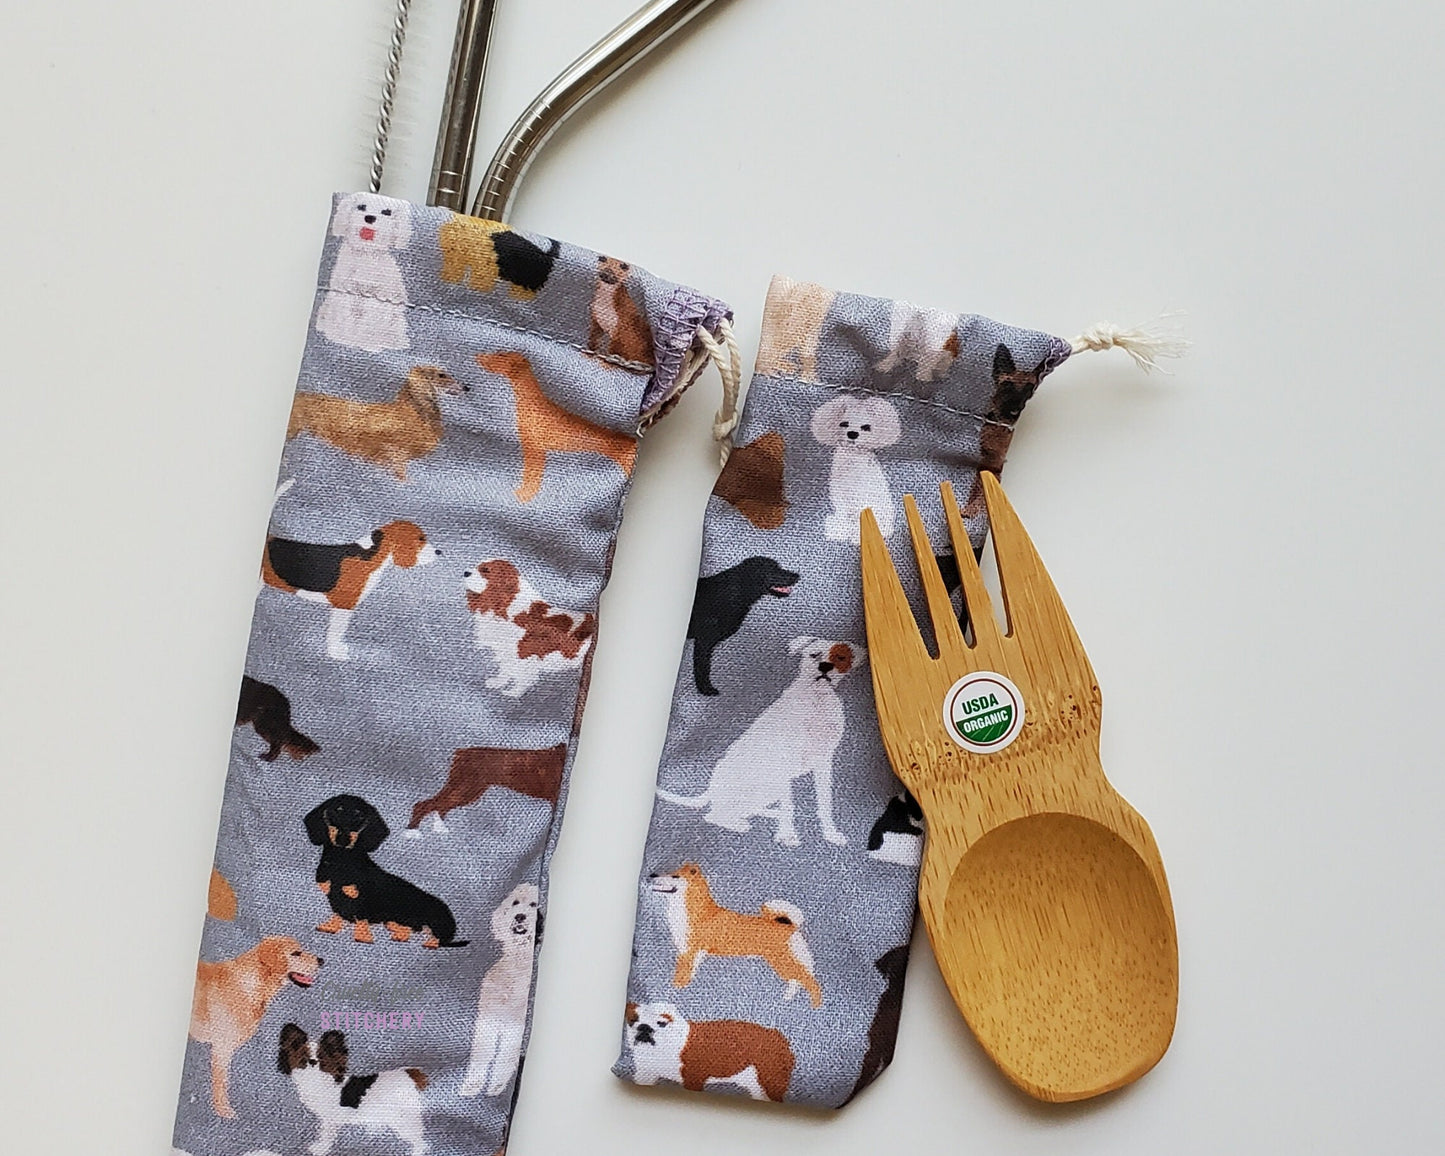 Reusable bamboo spork and straw pouch set. The pouches are a grey with assorted dogs printed on the fabric, such as beagles, basset hounds, dachshunds, pomeranians, golden retrievers, and more.